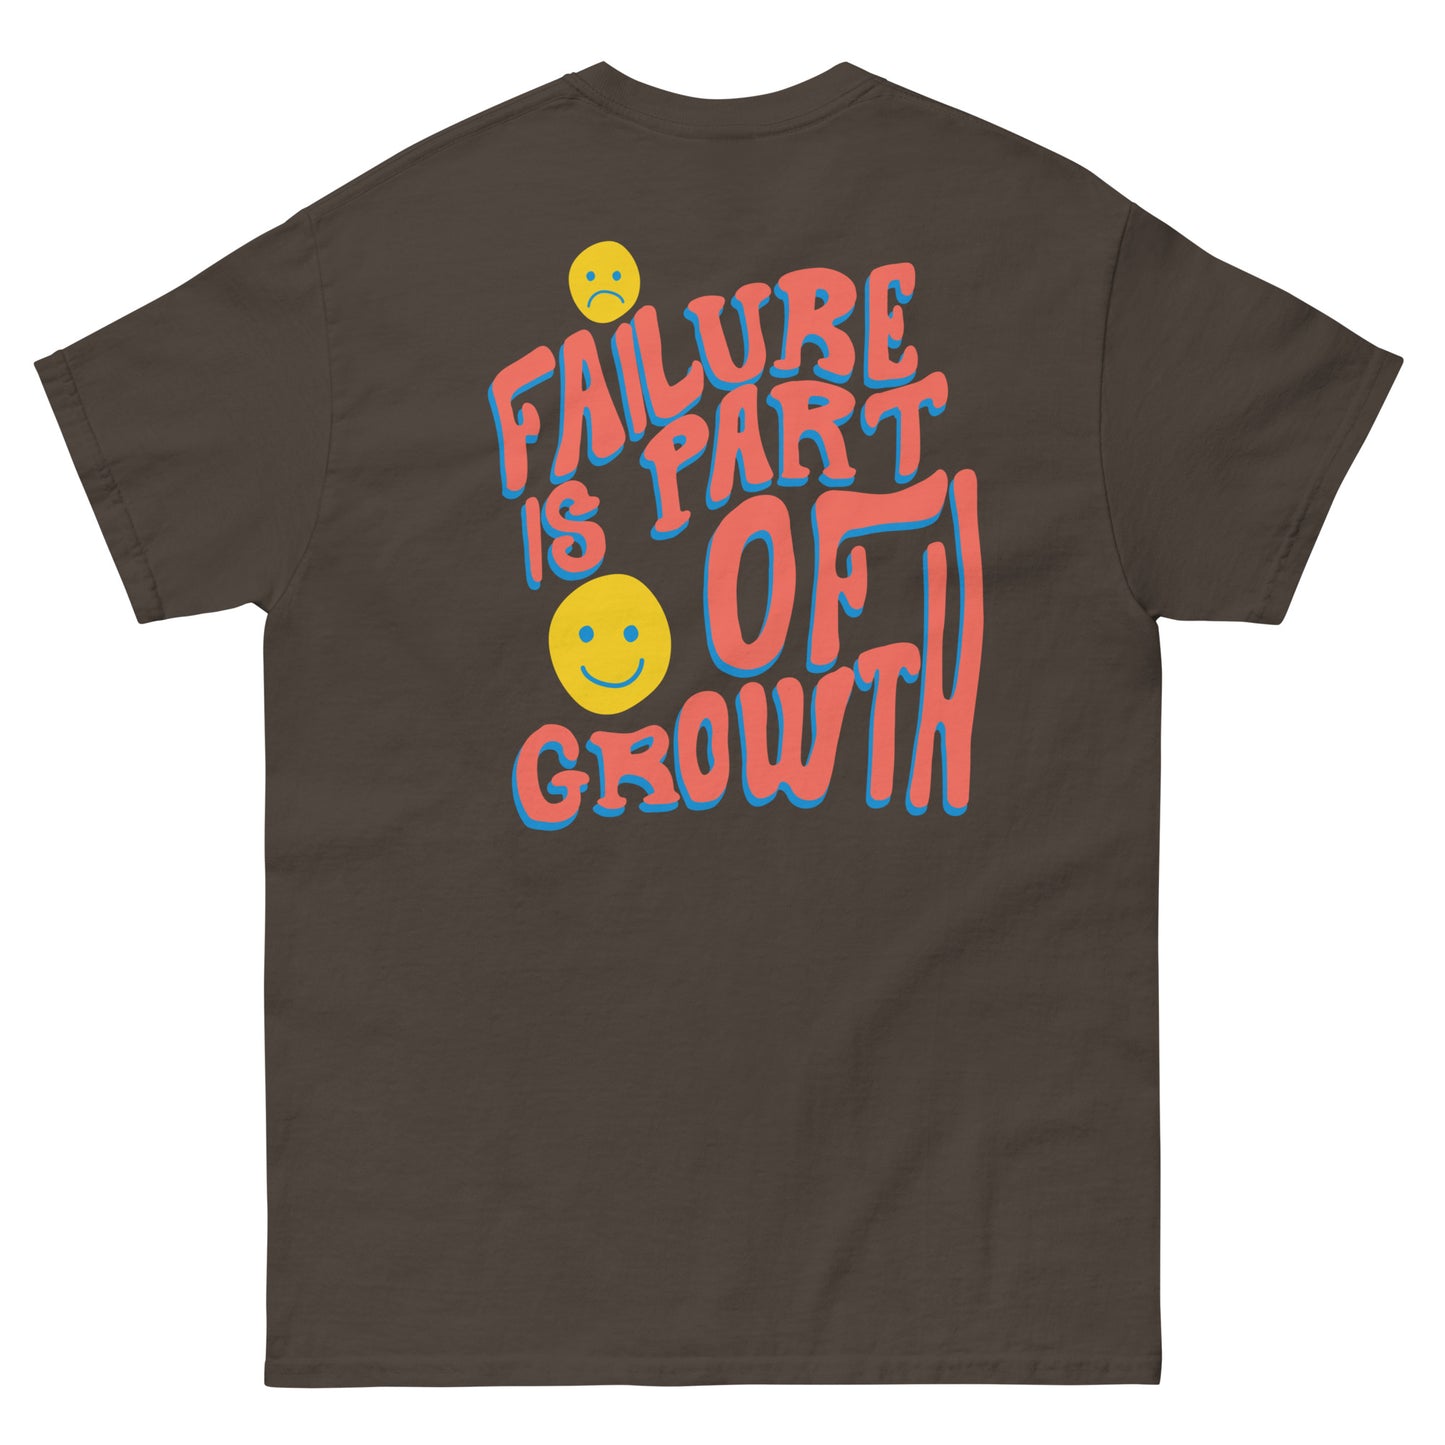 Failure is a part of Growth tee